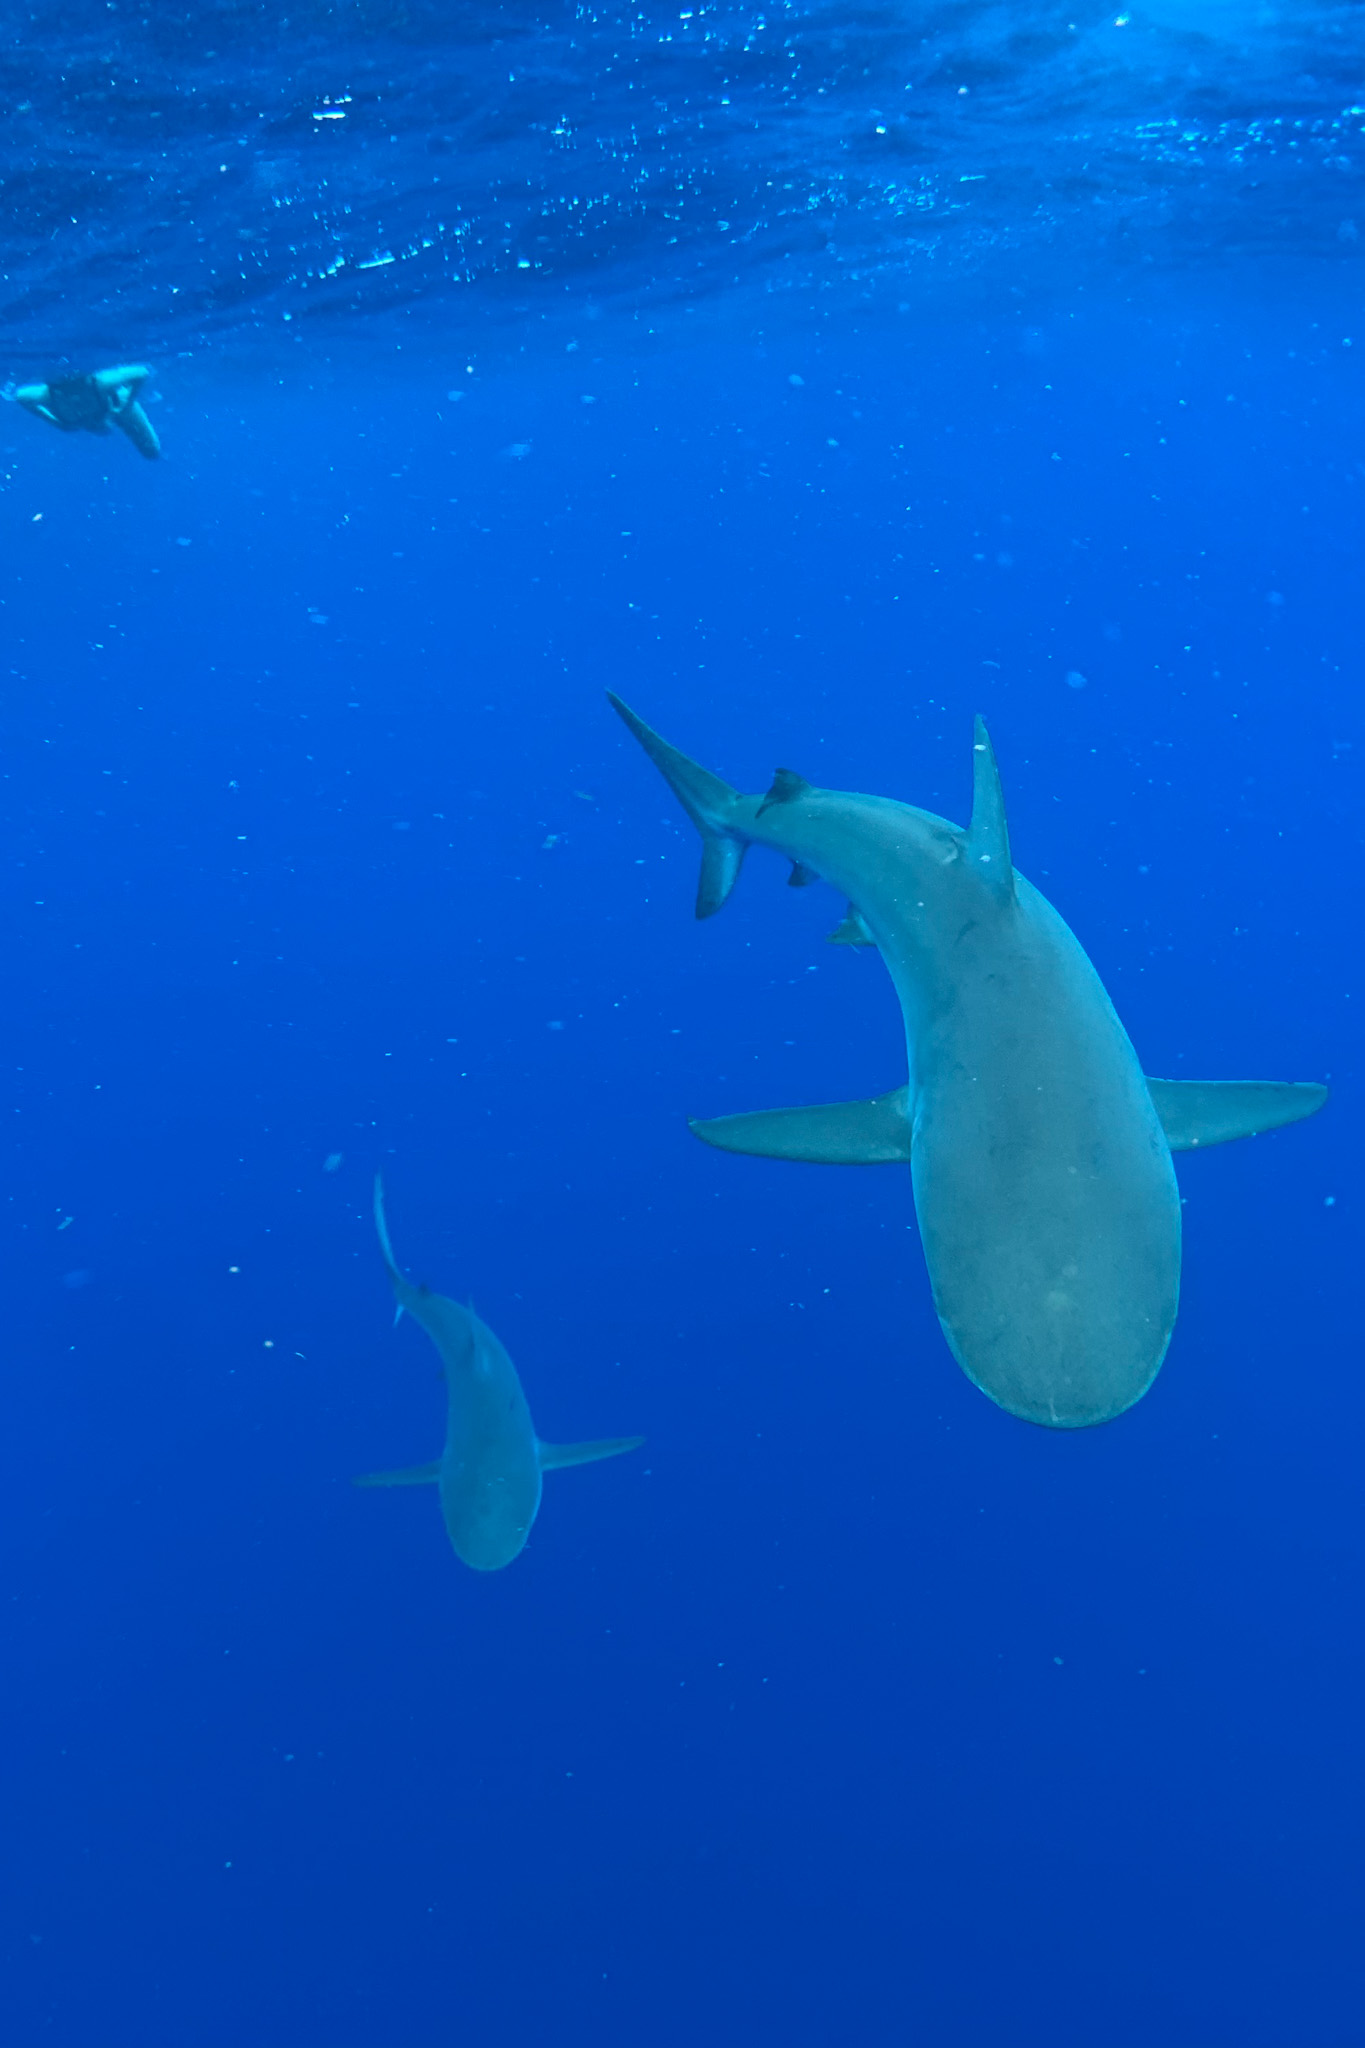 Two Galapagos sharks in the ocean